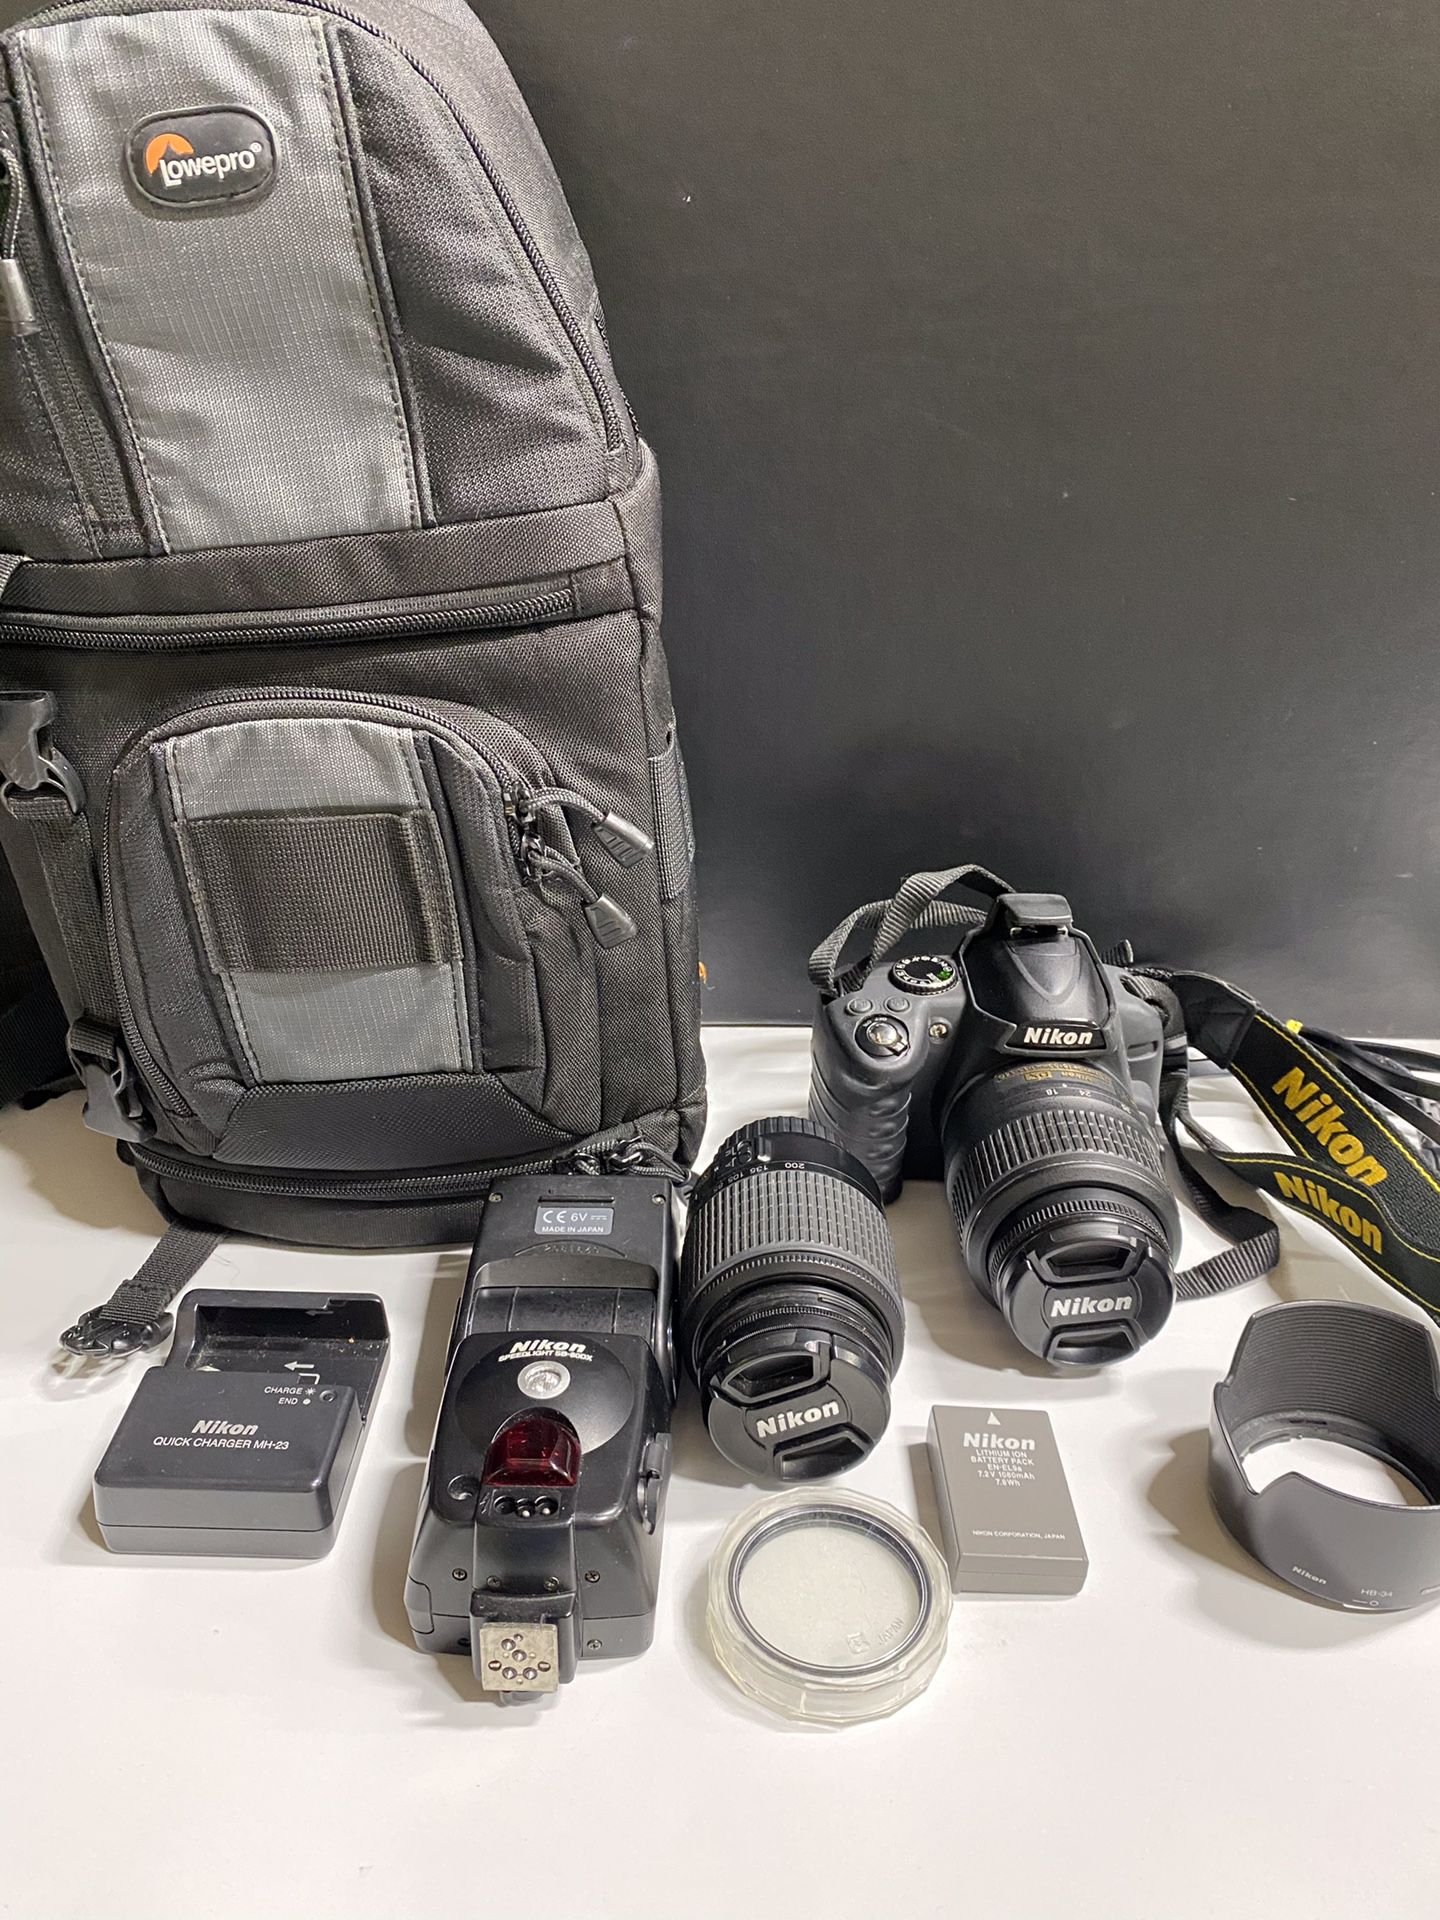 Nikon D3000DSL camera bundle- comes with everything shown